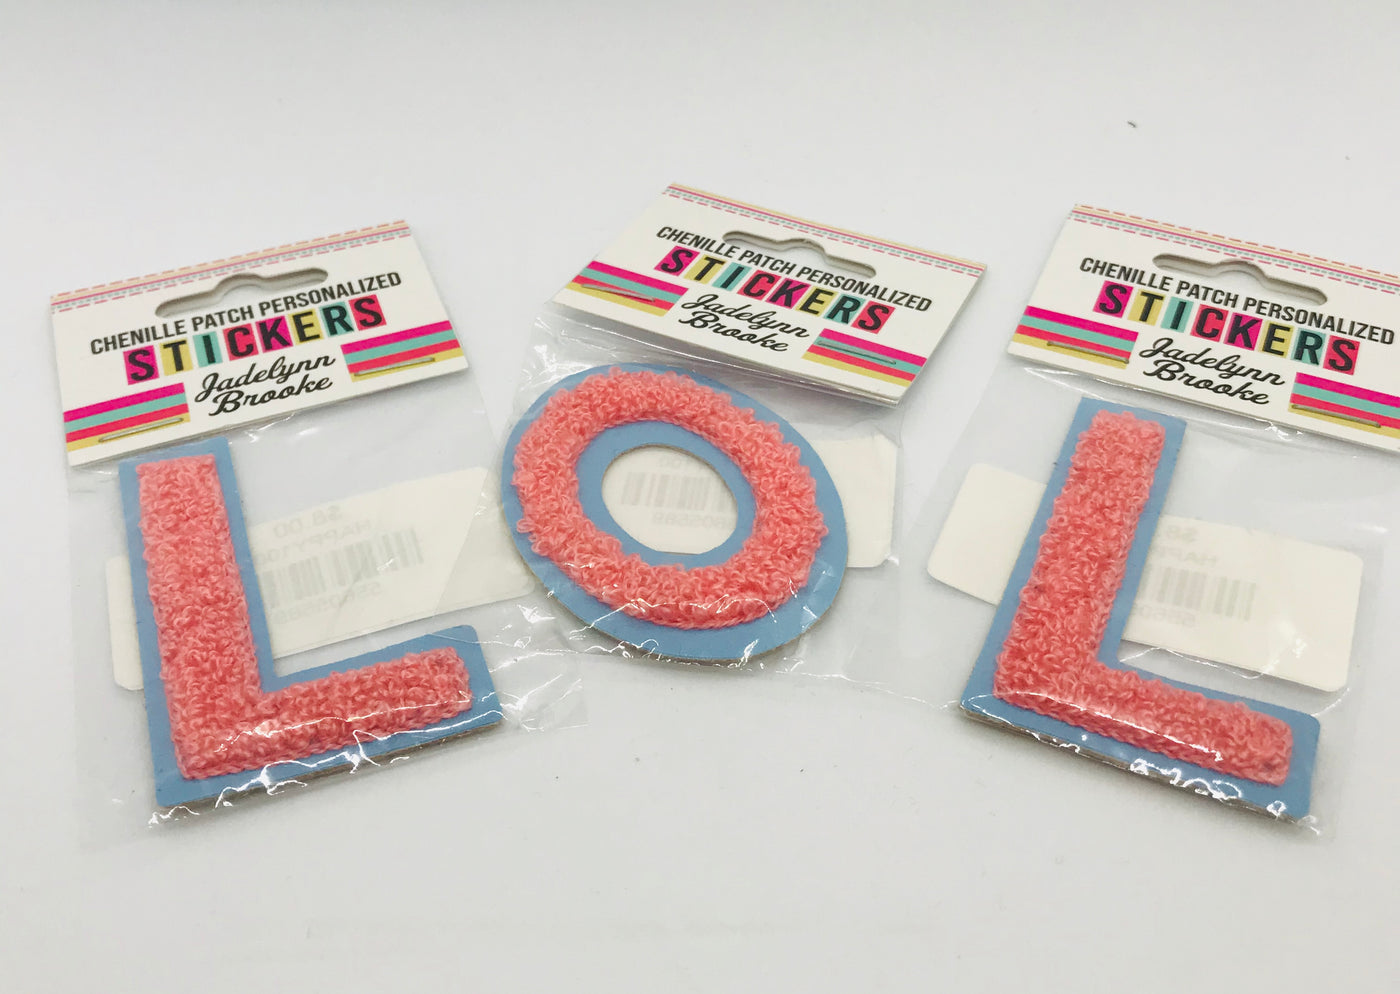 Chenille Patch Personalized Stickers